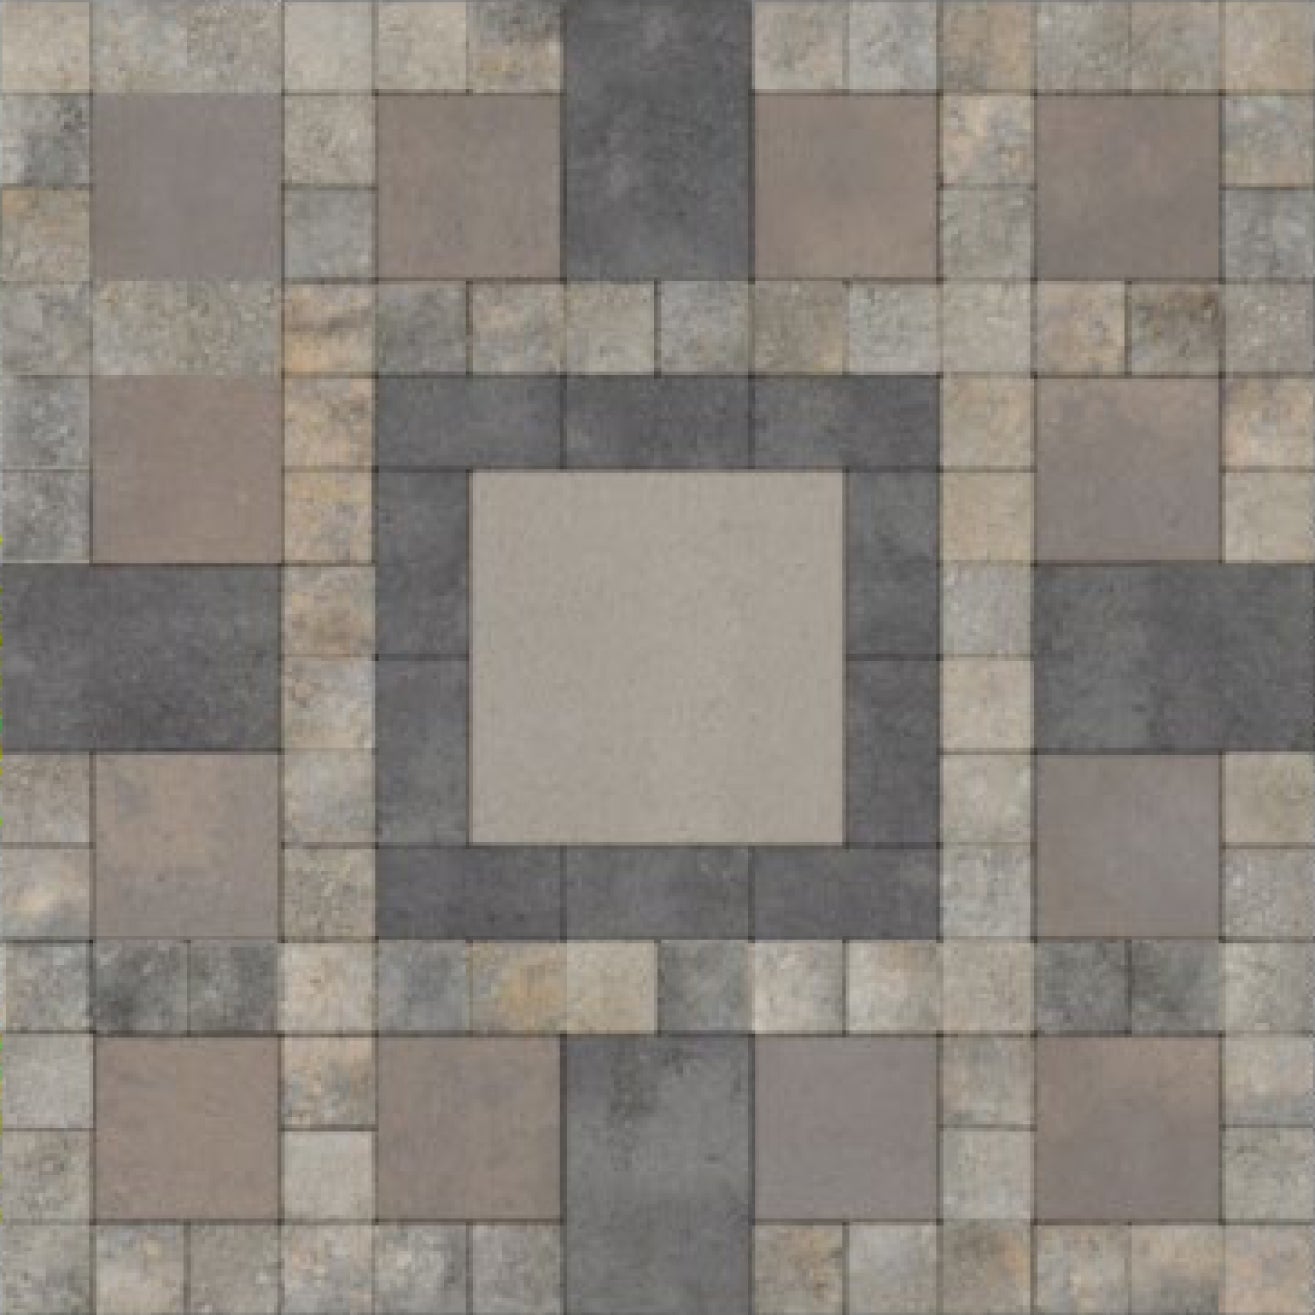 paver borders and accents